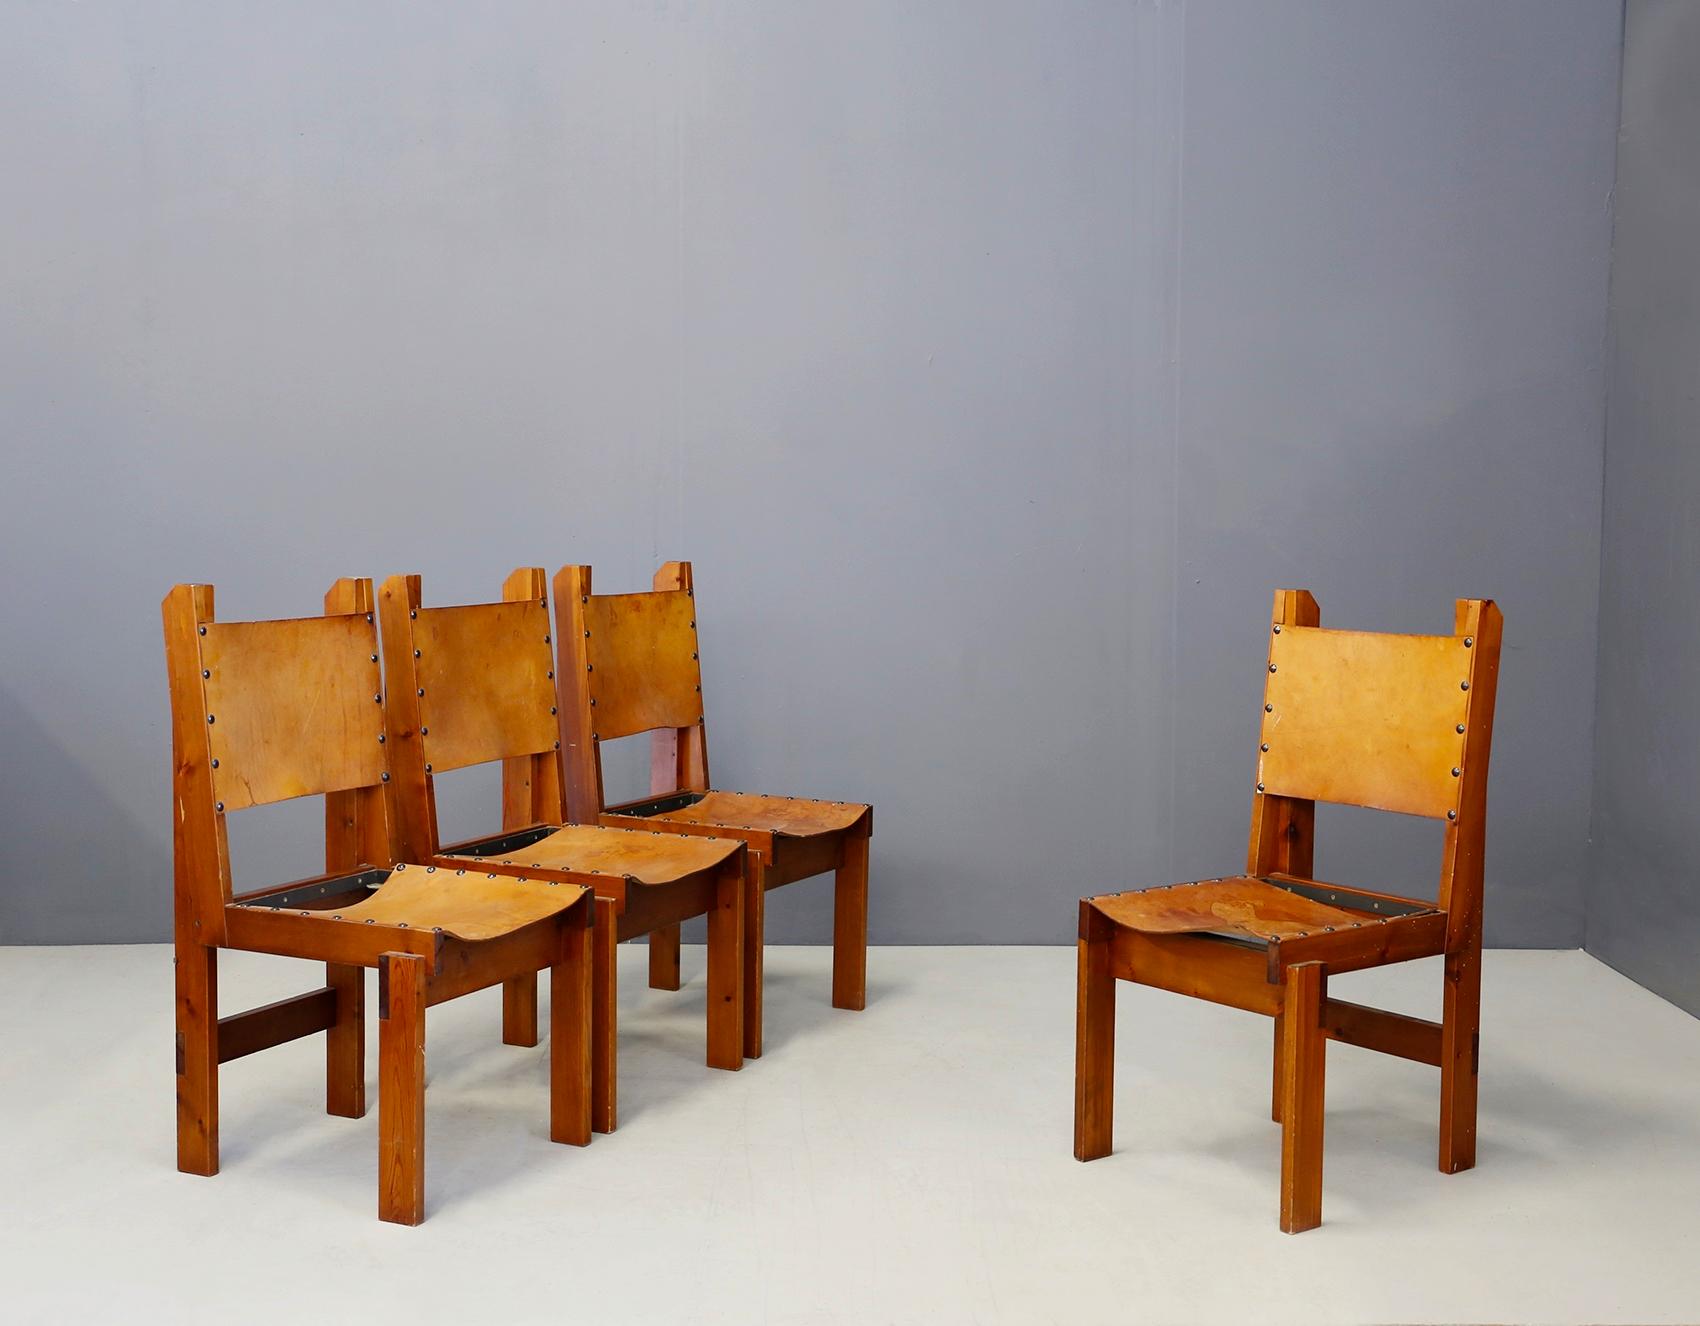 Set of 4 four French manufacture chairs from 1960. The set we propose is in the style of Pierre Chapo, for its cherrywood frame and leather seat and backrest. The particularity of the chairs is its leather upholstery sealed to the seat with large